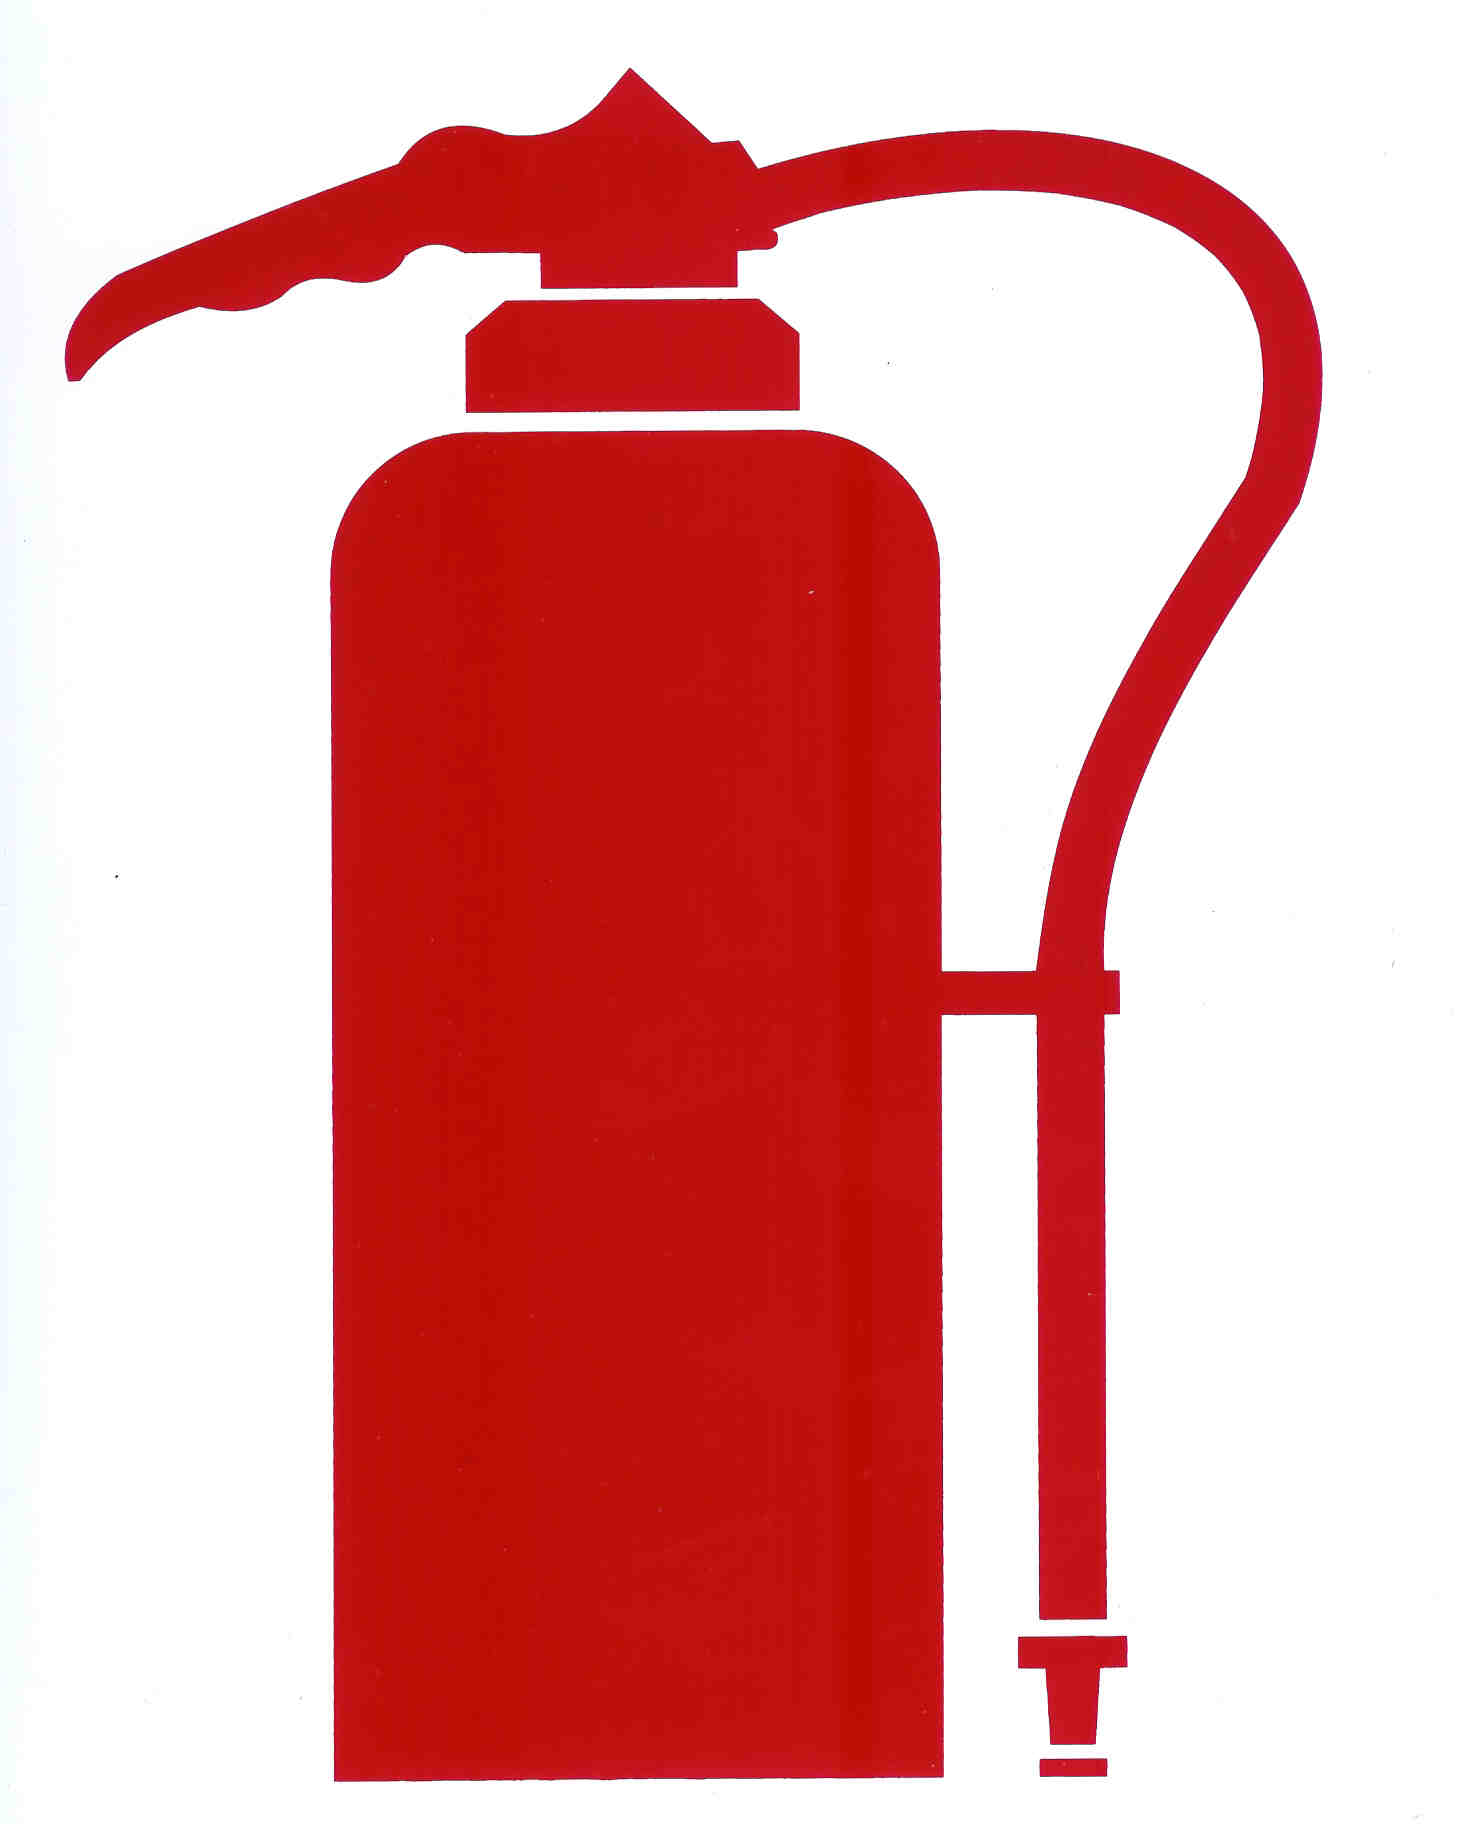 Printable Fire Extinguisher Signs